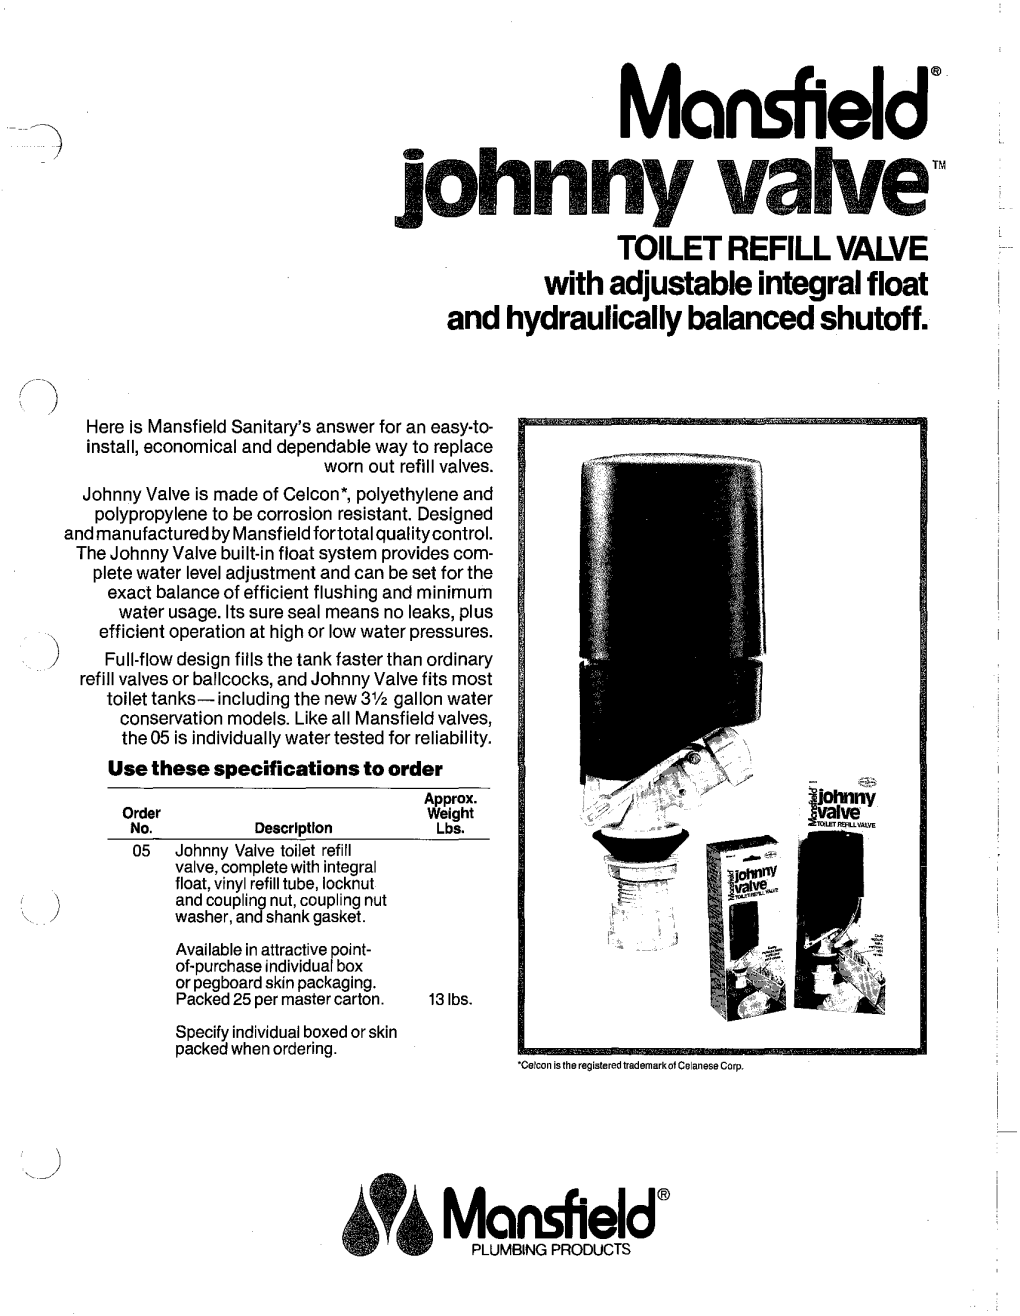 Mansfield" Johnny Valve" TOILET REFILL VALVE with Adjustable Integral Float and Hydraulically Balanced Shutoff